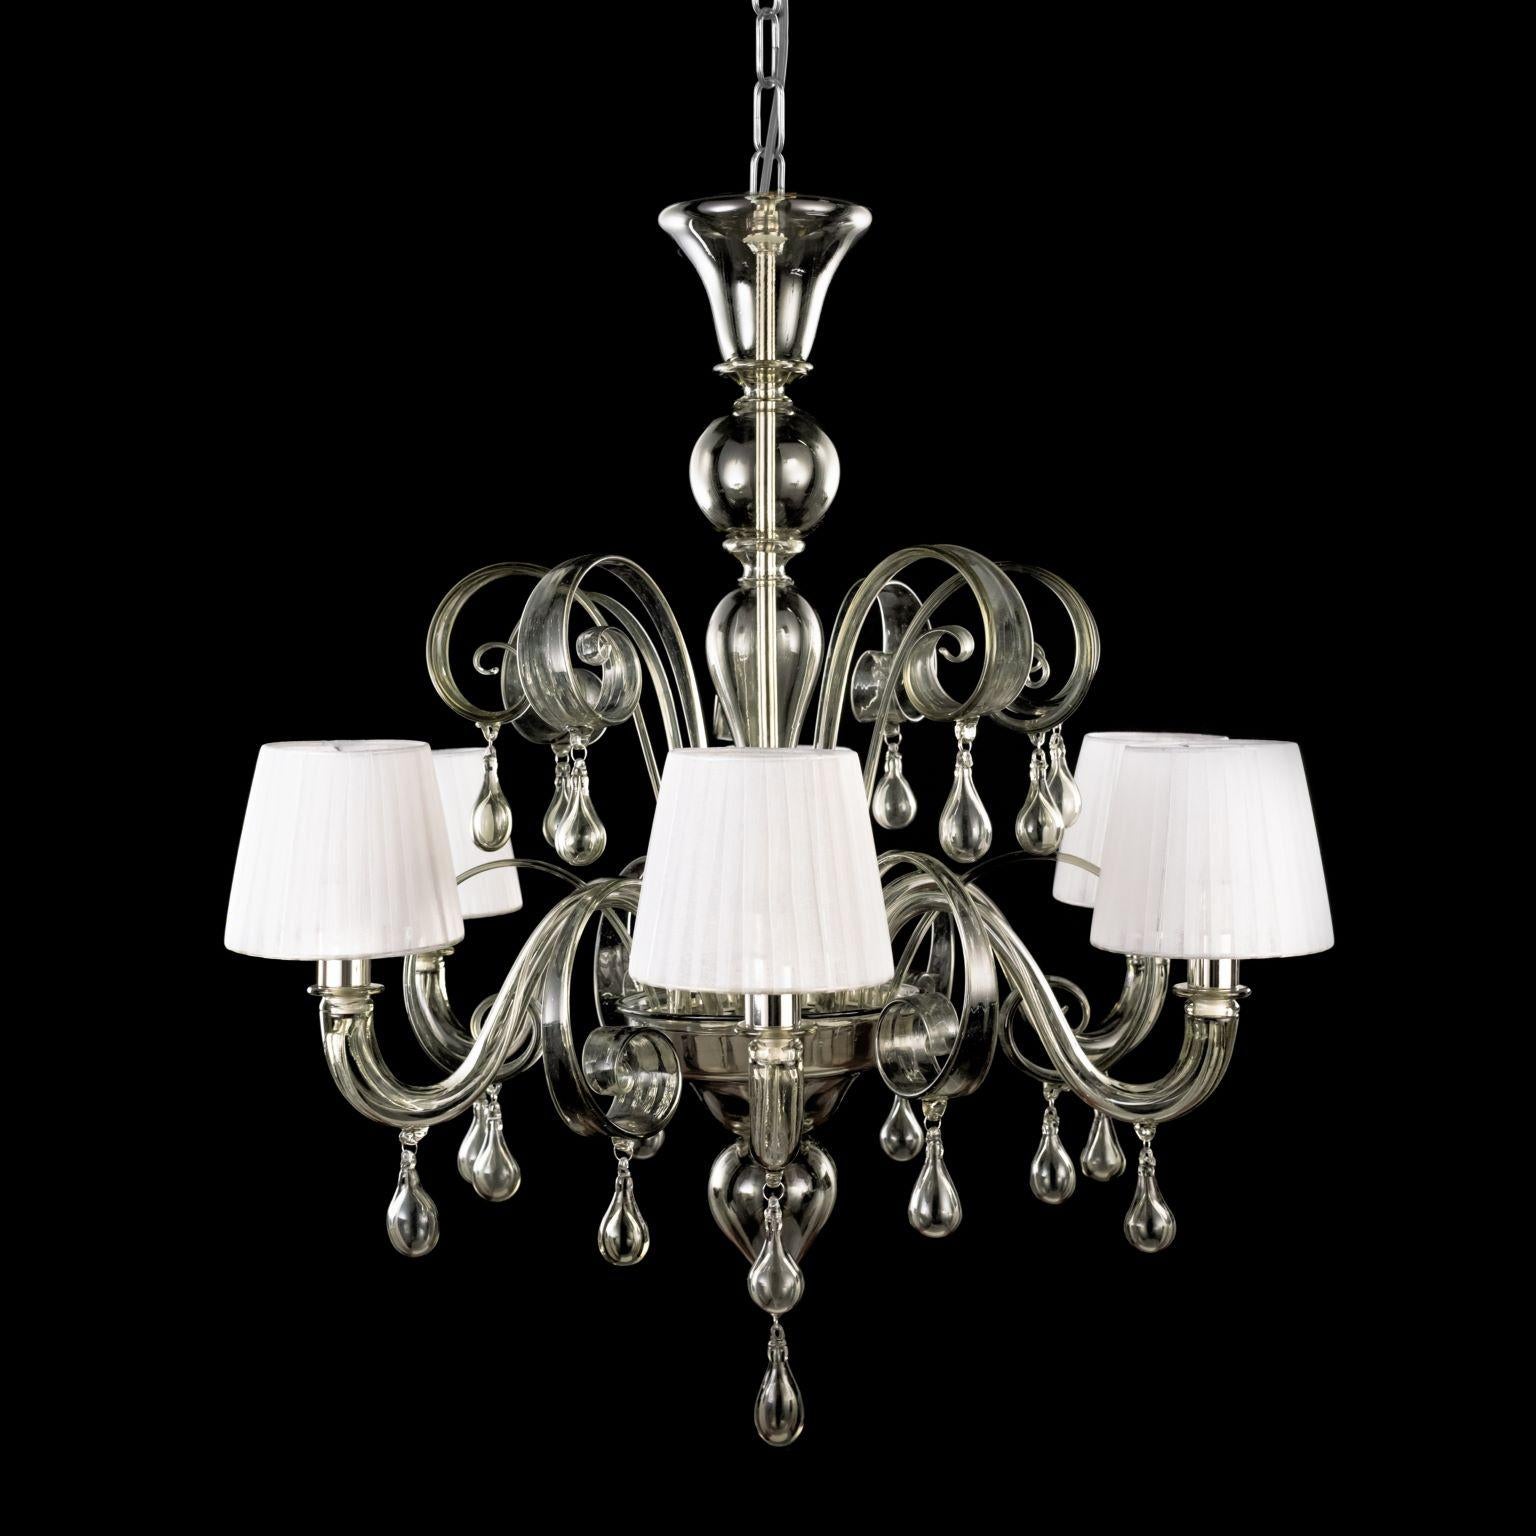 Parisienne chandelier, 6 lights with curl and drop shaped glass elements. Light grey Murano glass. Light grey Organza lampshades by Multiforme
Sinuous elements, curls, pendant drop shaped glass elements and other decorations with a smooth and shiny